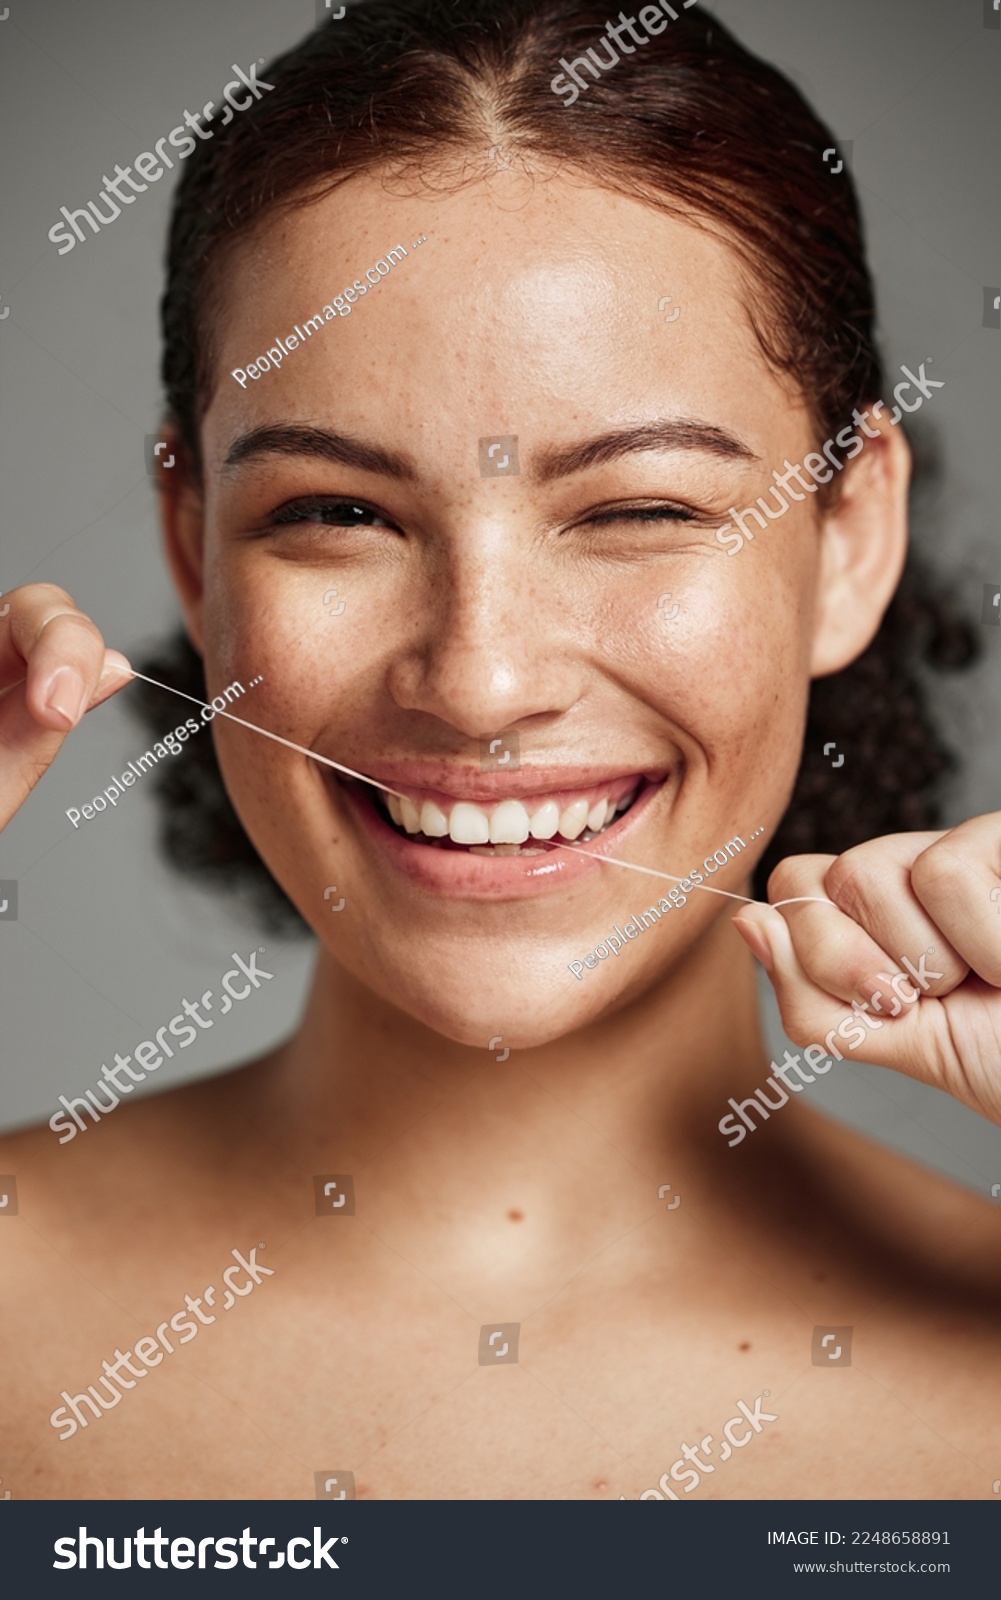 Teeth flossing, dental floss and portrait of woman with a smile in studio for oral hygiene, health and wellness. Face of happy female on grey for self care, healthcare and grooming for healthy mouth #2248658891